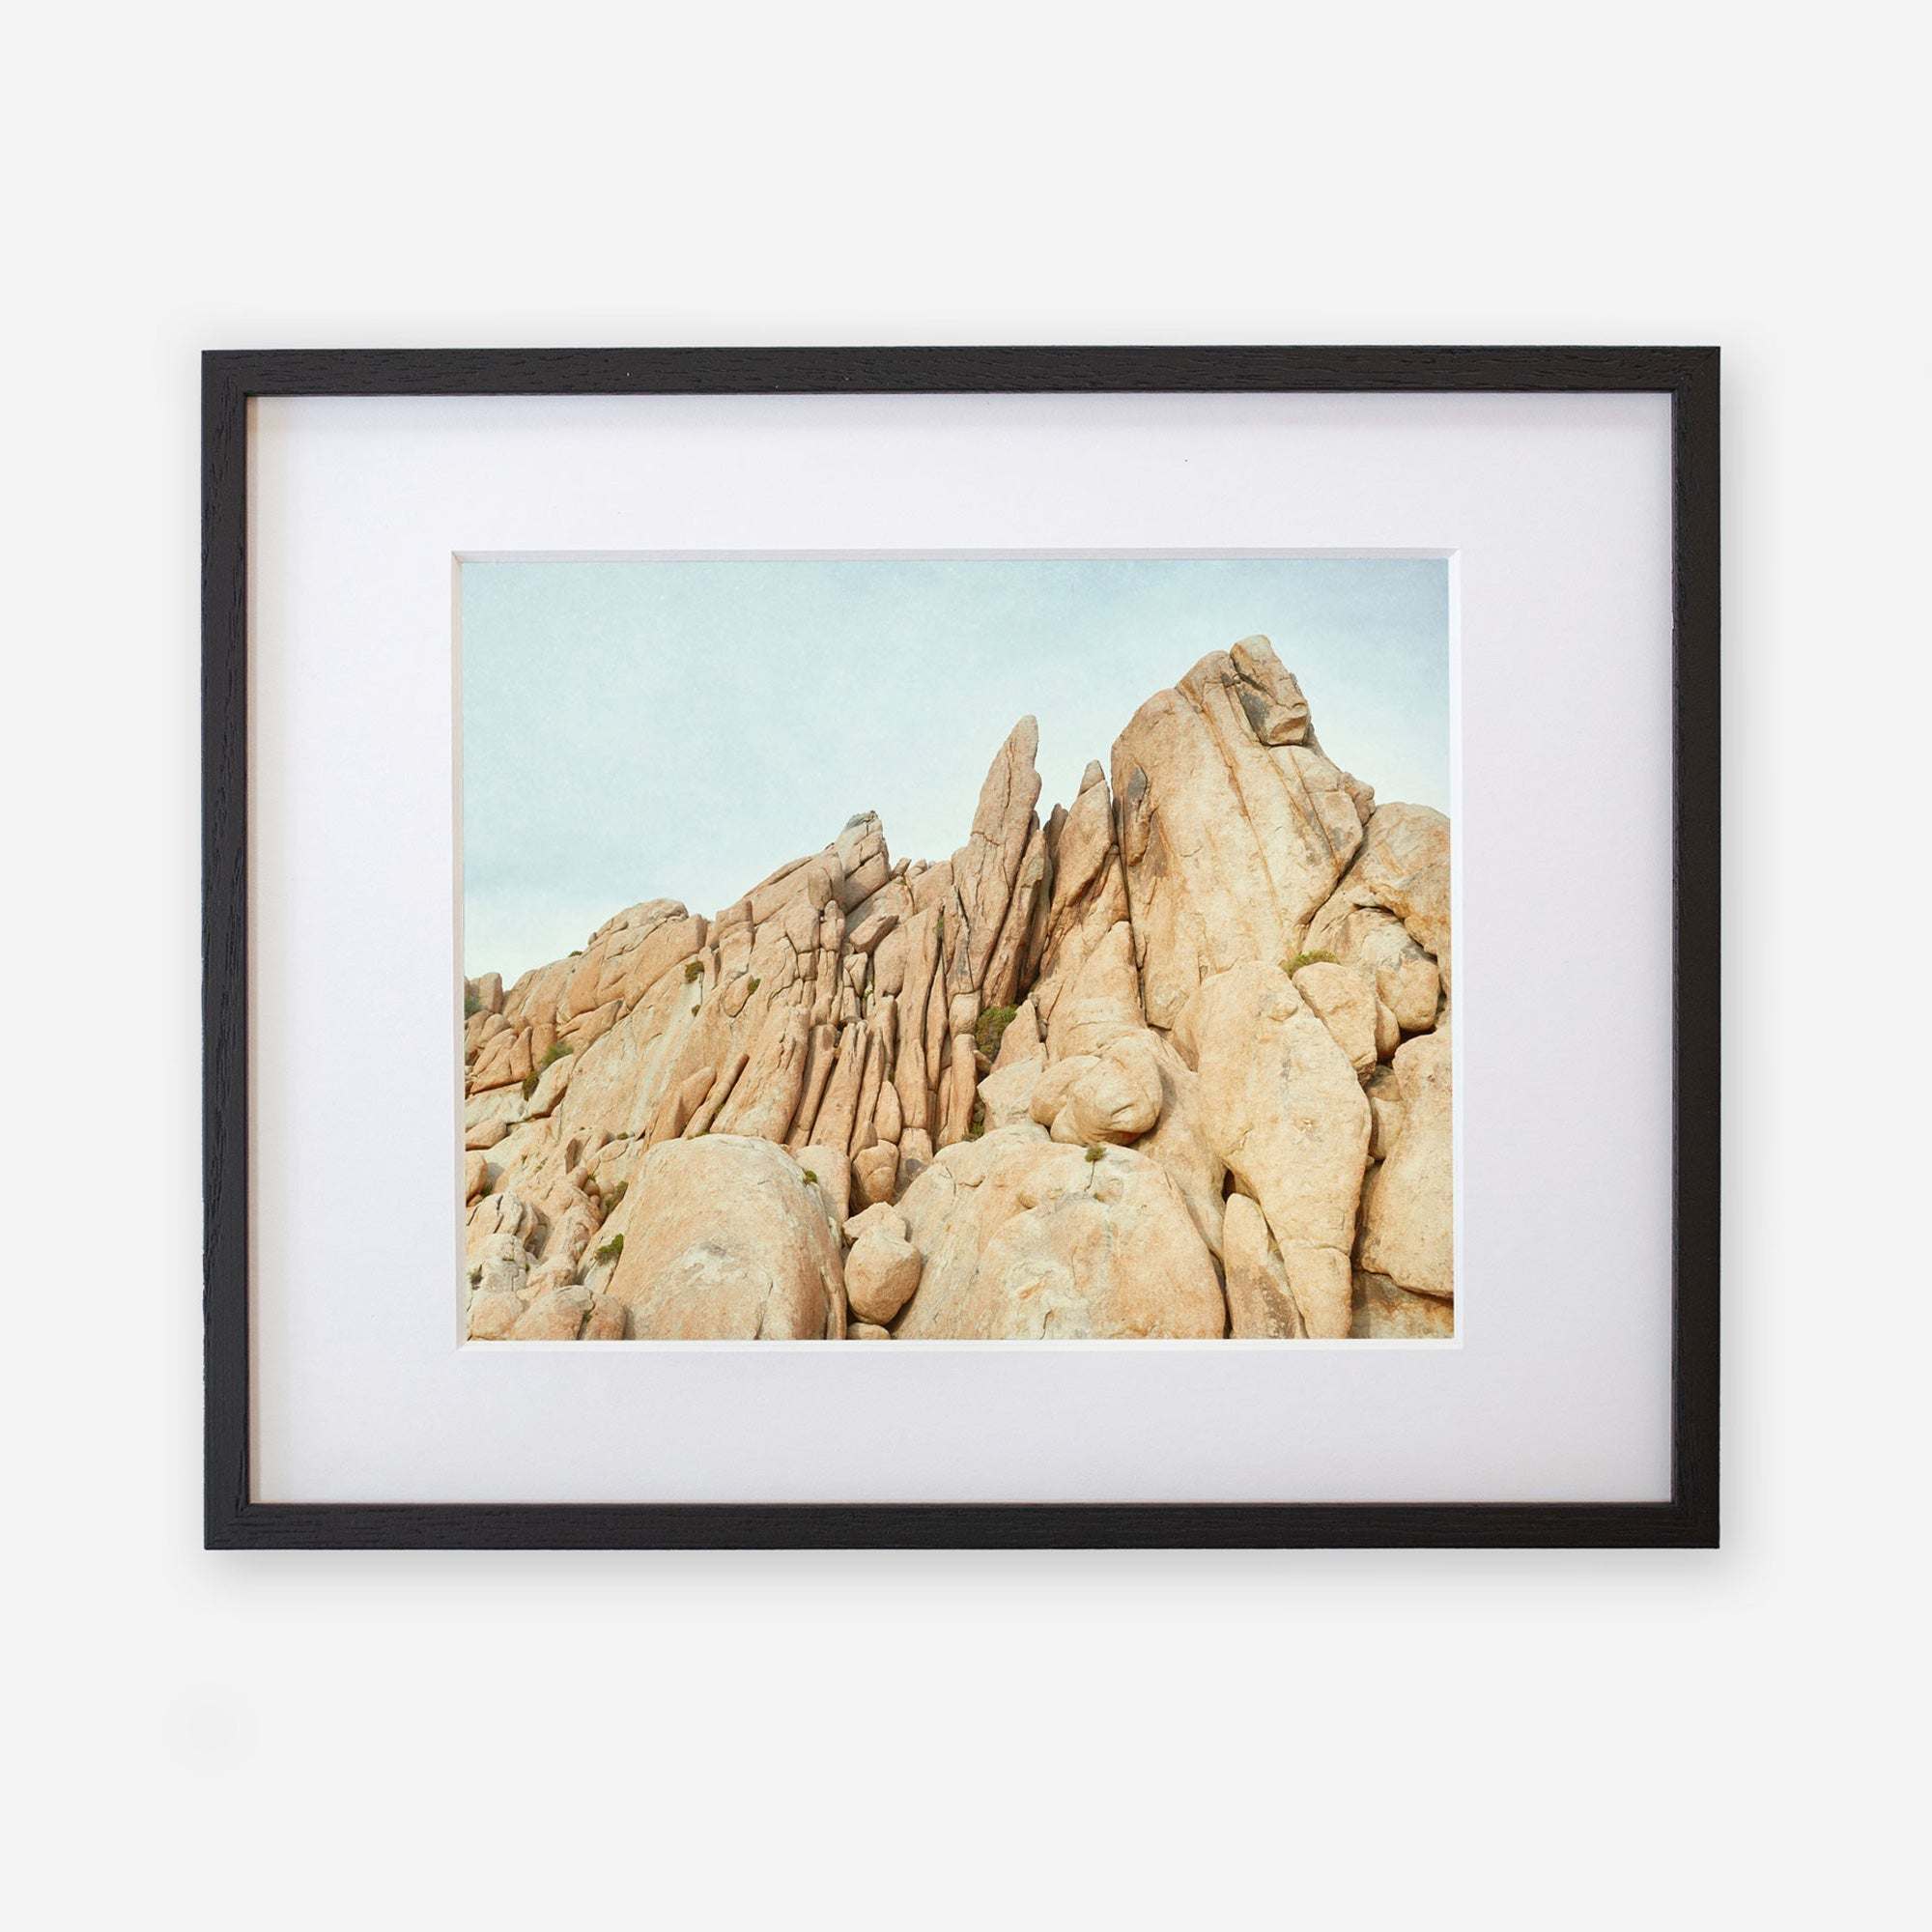 A framed photograph depicting a rugged landscape of towering beige rock formations under a pale blue sky in Joshua Tree. The frame is black with a white mat border, on a white background. - Offley Green&#39;s Joshua Tree Print, &#39;Joshua Rocks&#39;